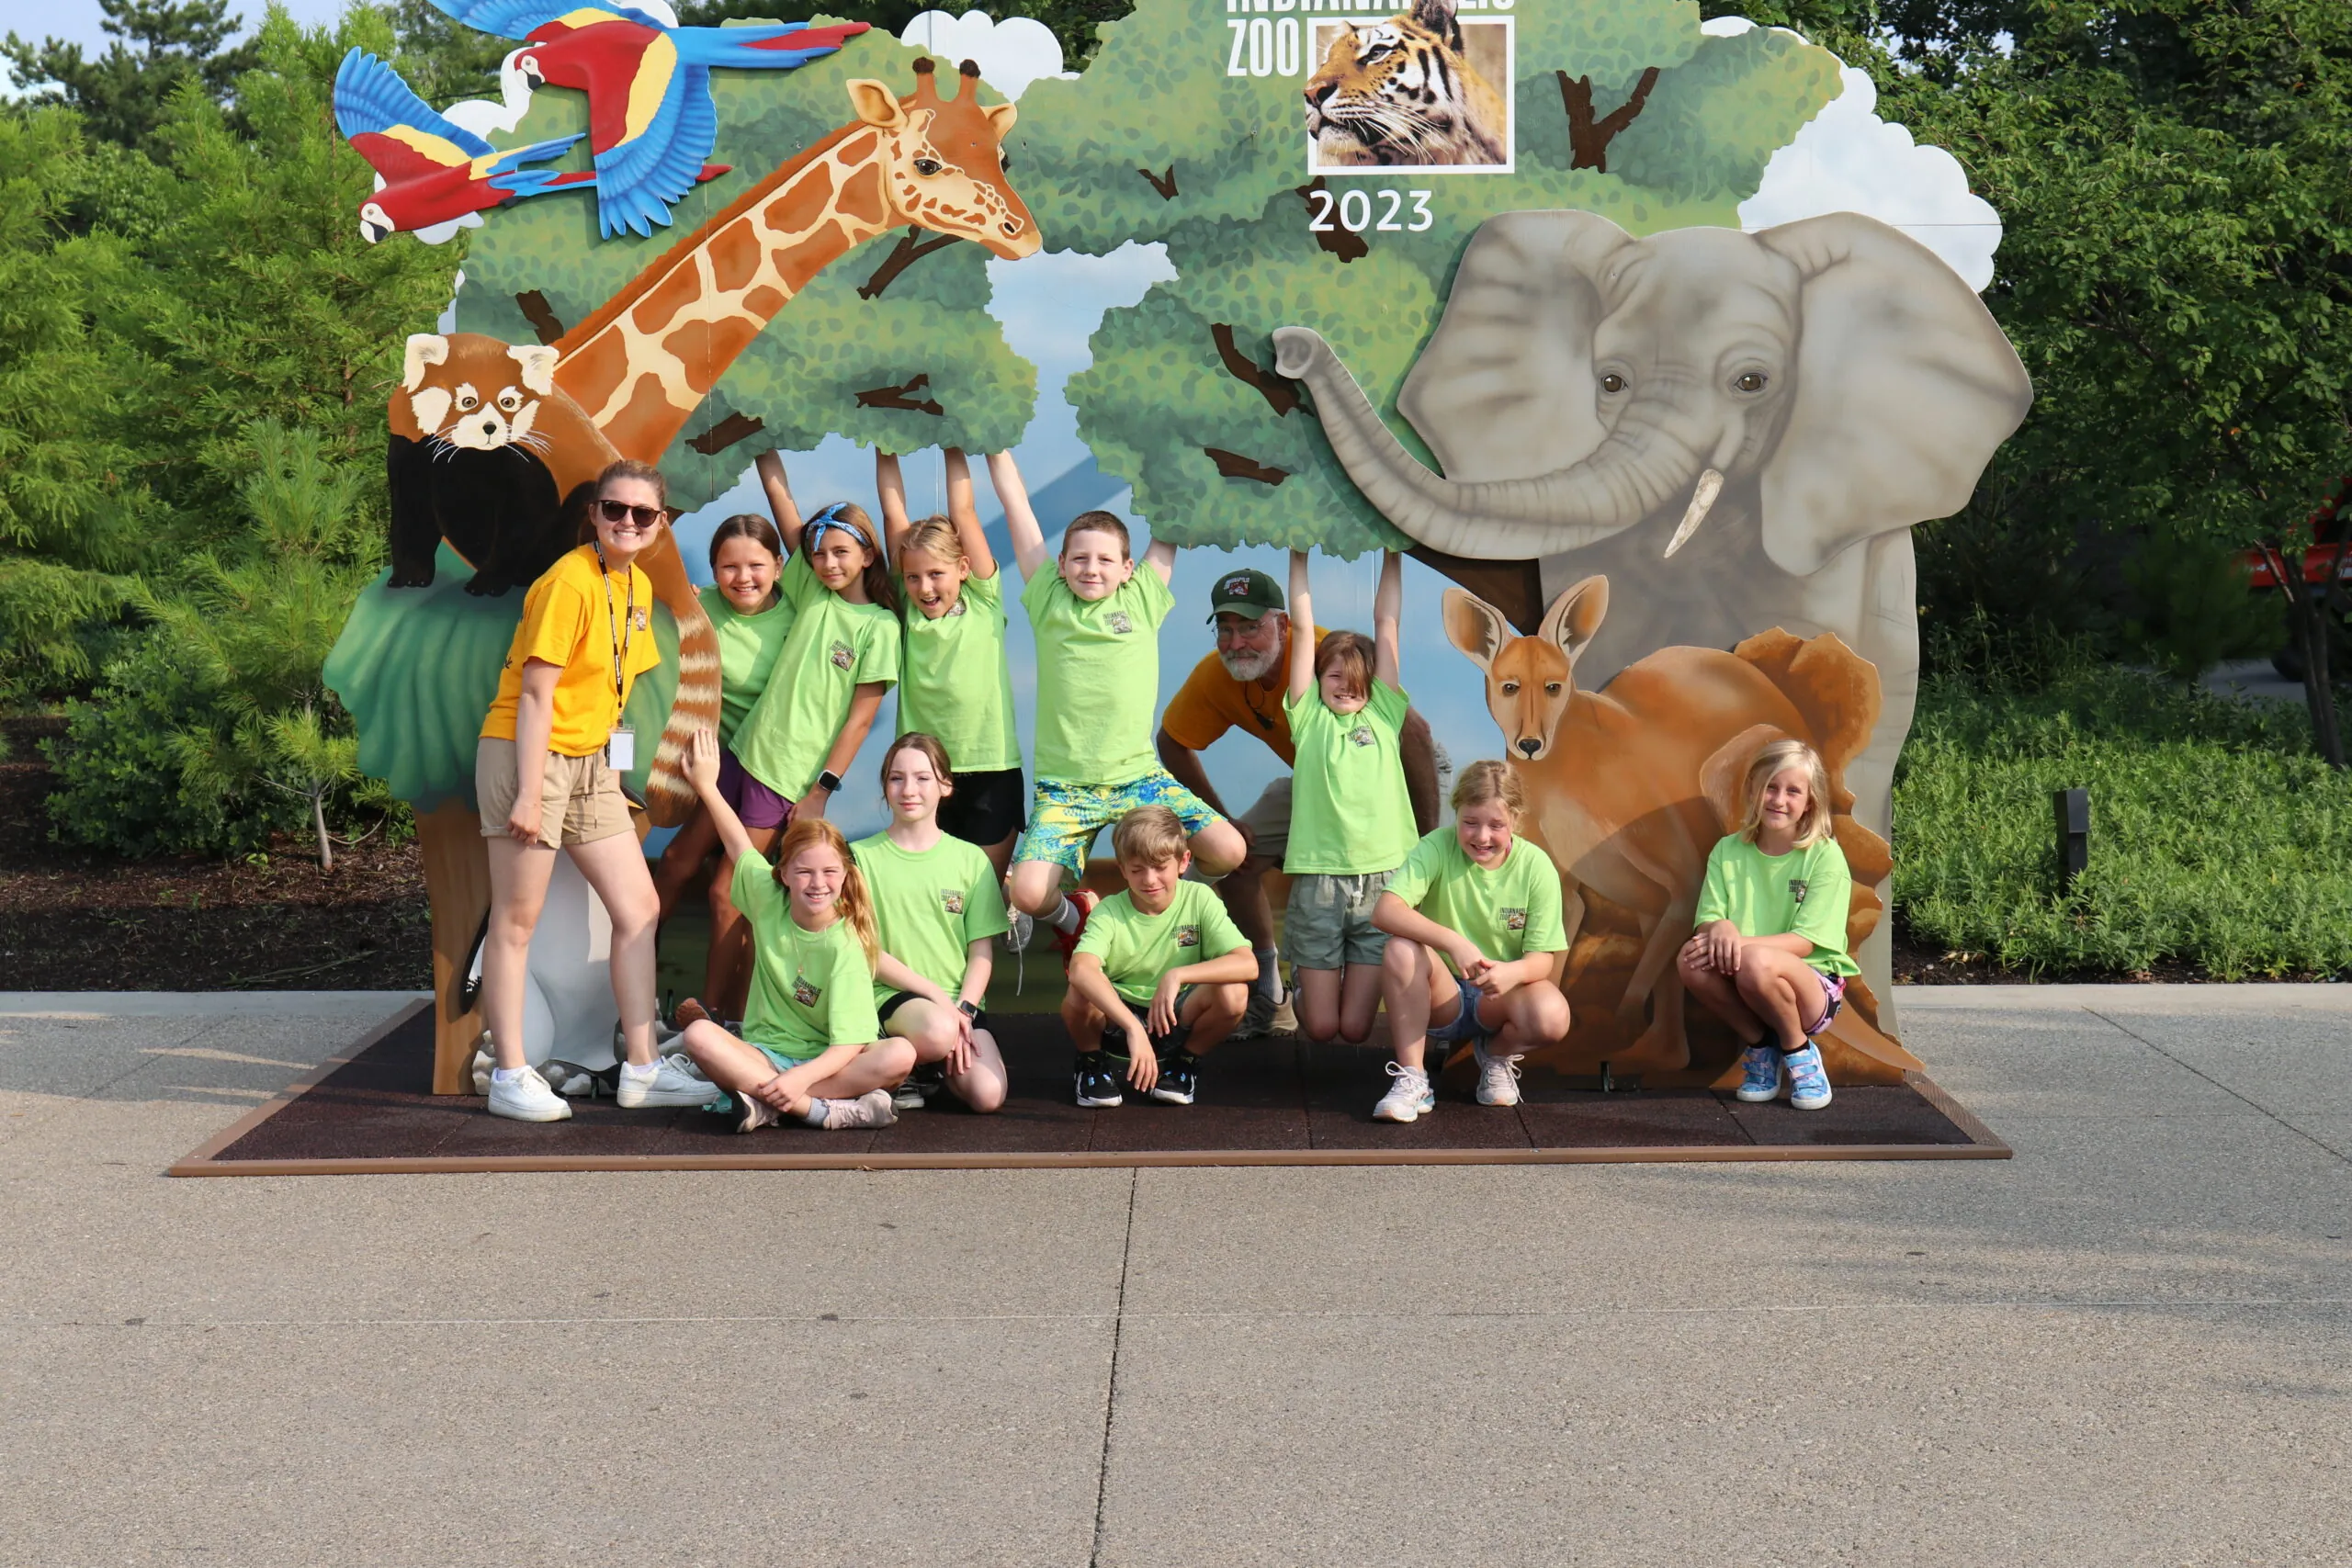 Zoo campers taking a group photo